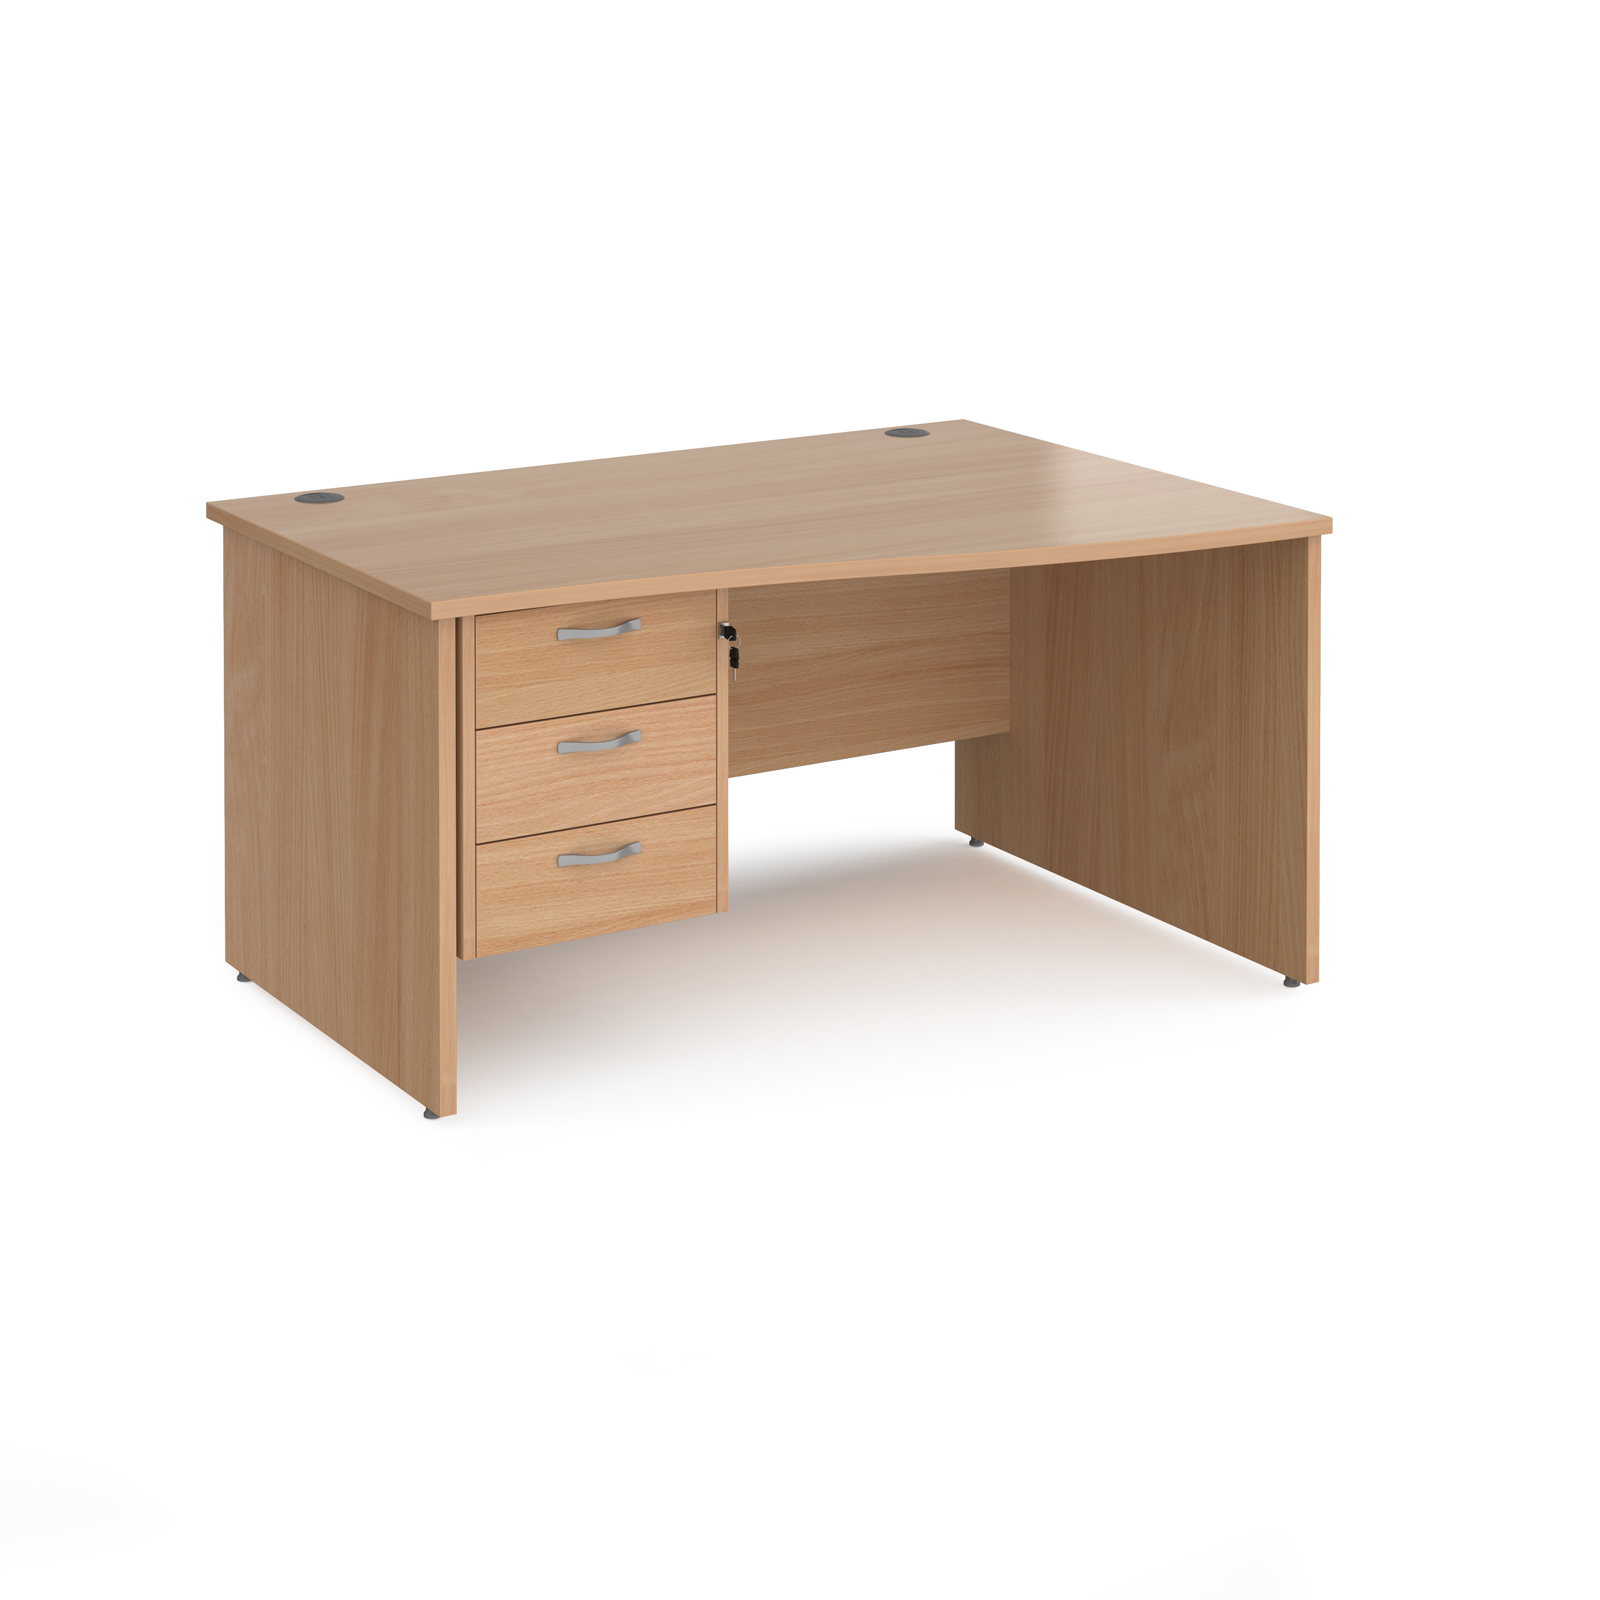 Maestro 25 right hand wave desk 1400mm wide with 3 drawer pedestal - beech top with panel end leg